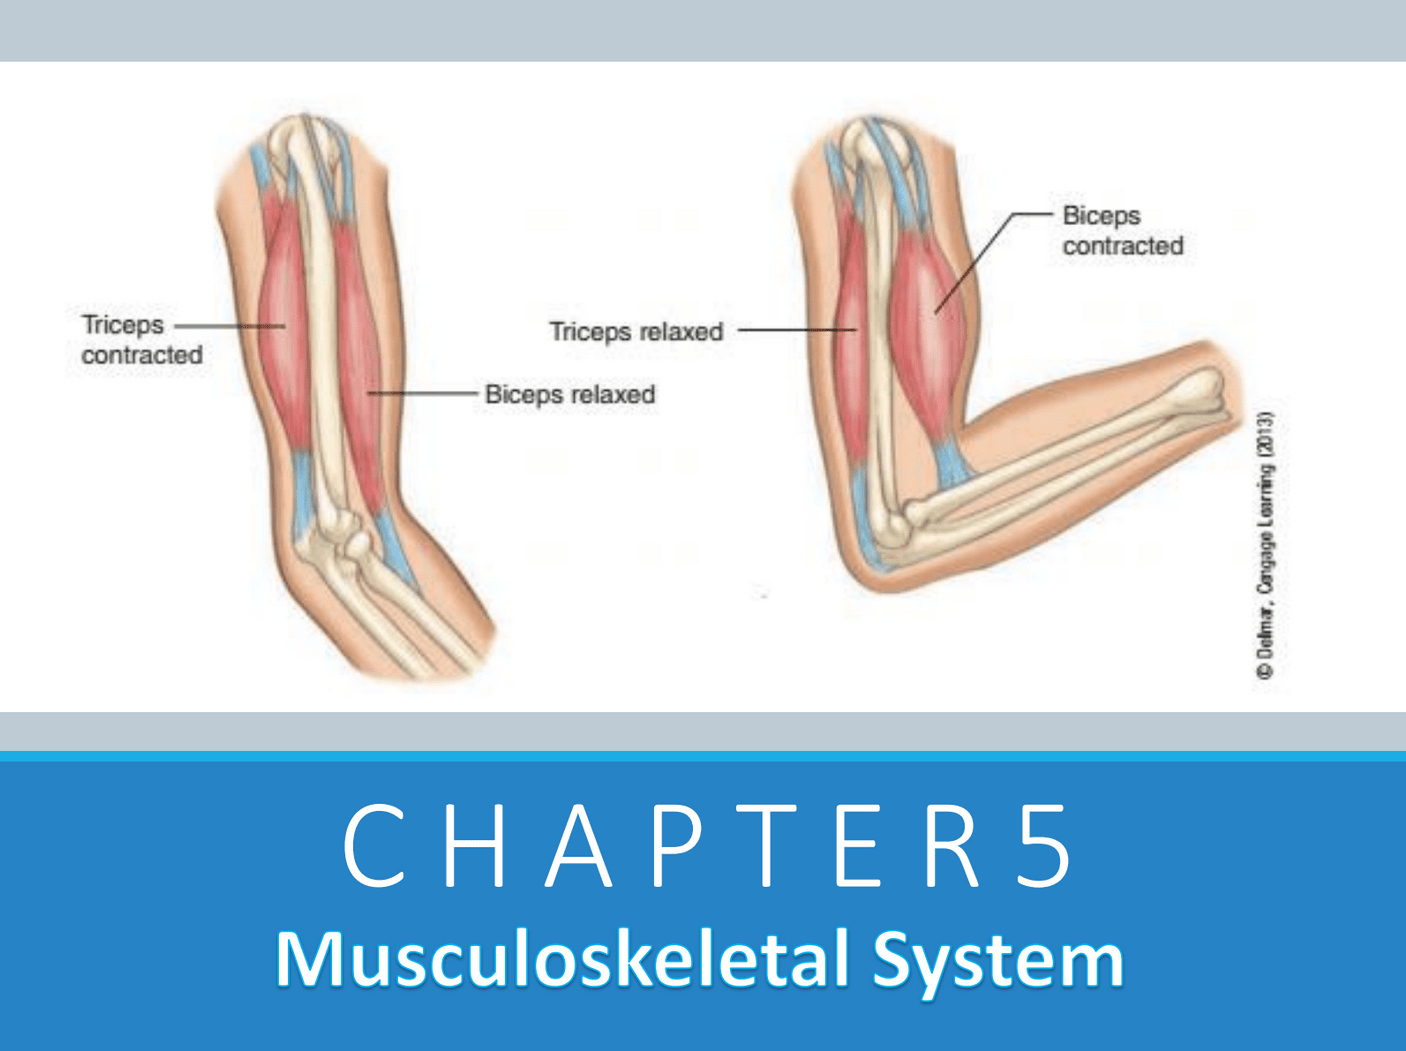 Chapter 5: Musculoskeletal System